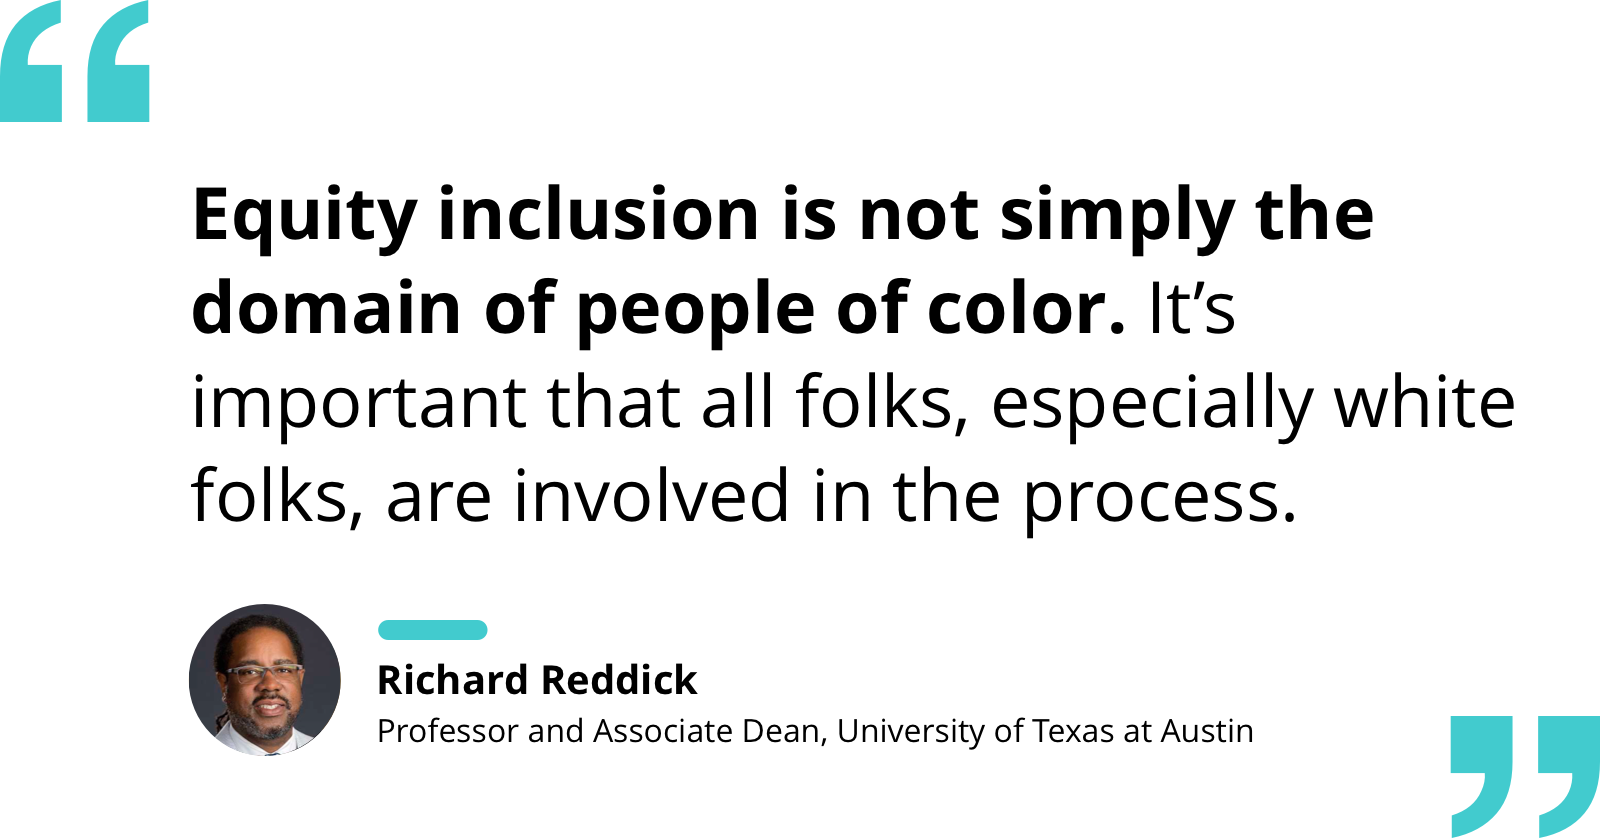 Quote by Richard Reddick re: the need for people from every group to be involved in the process of equity inclusion.